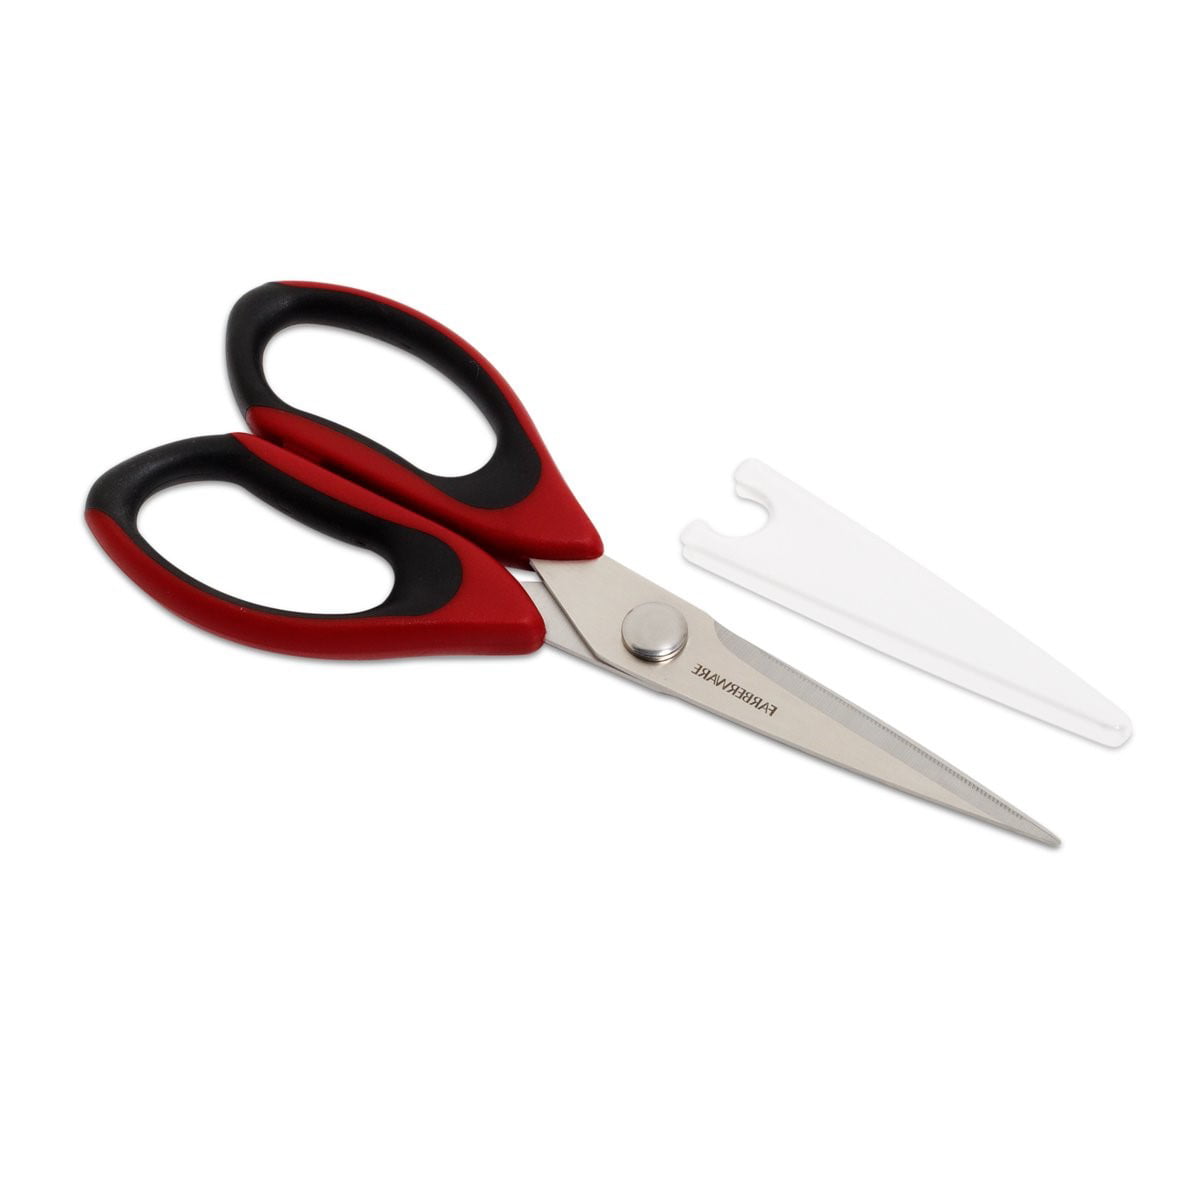 Farberware Professional Kitchen Shears with Blade Cover